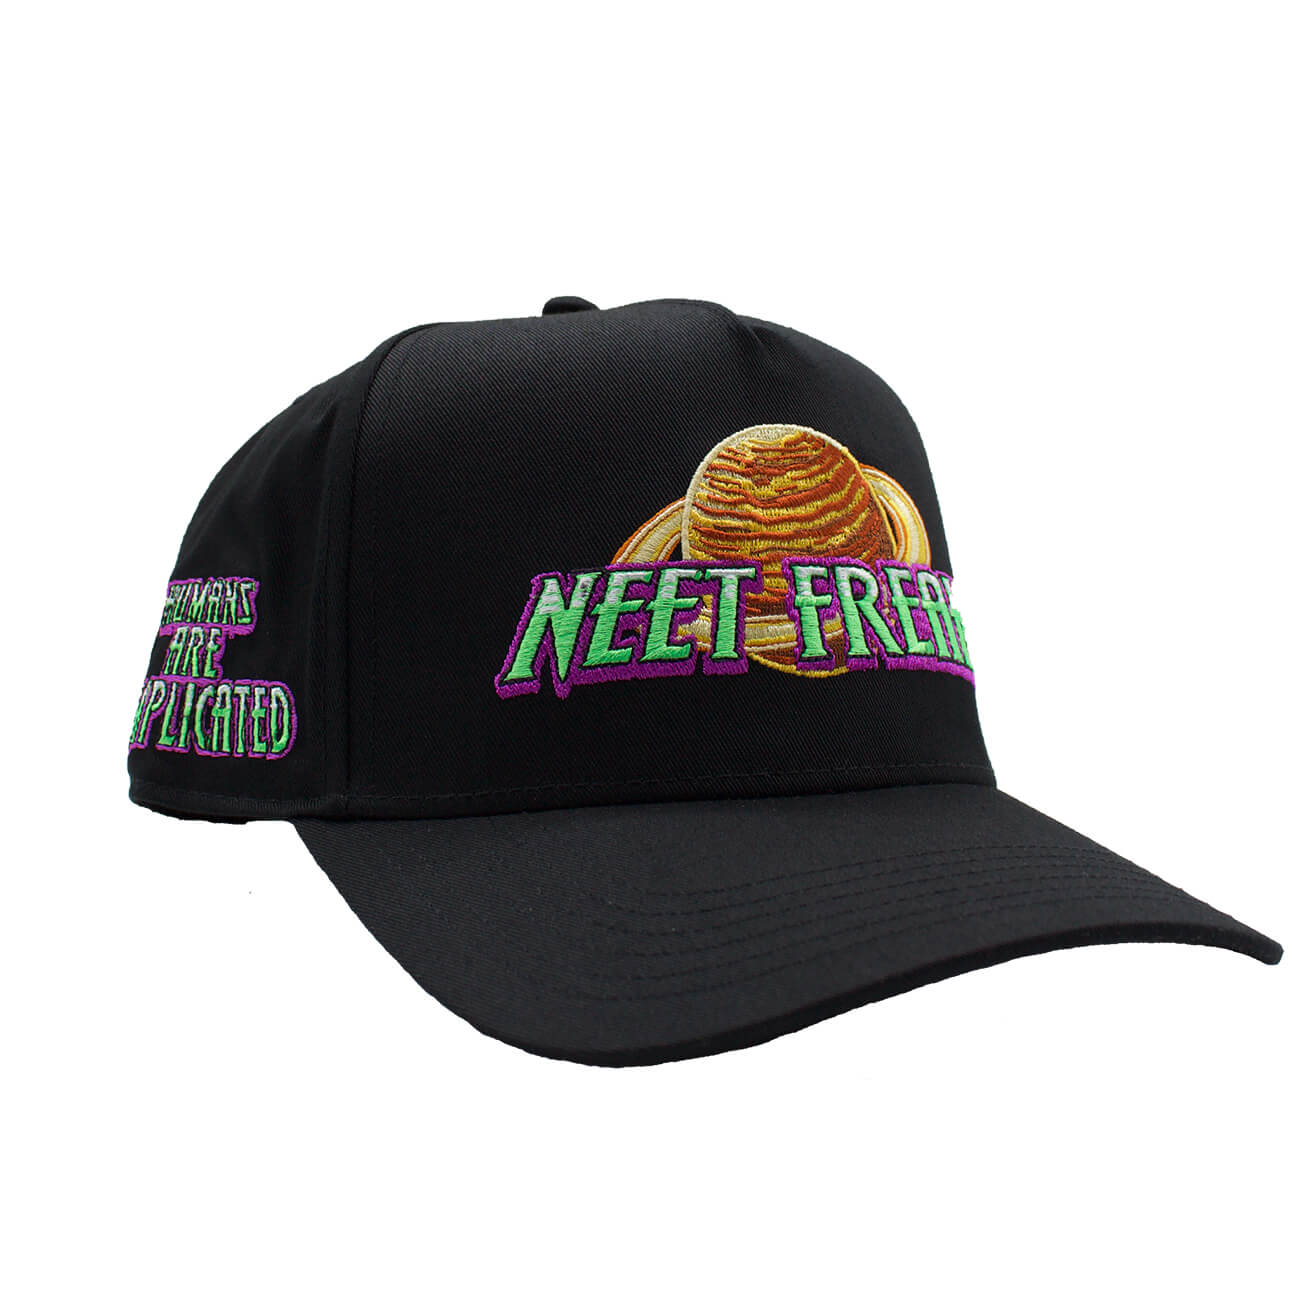 Out of this World Black Trucker Hat